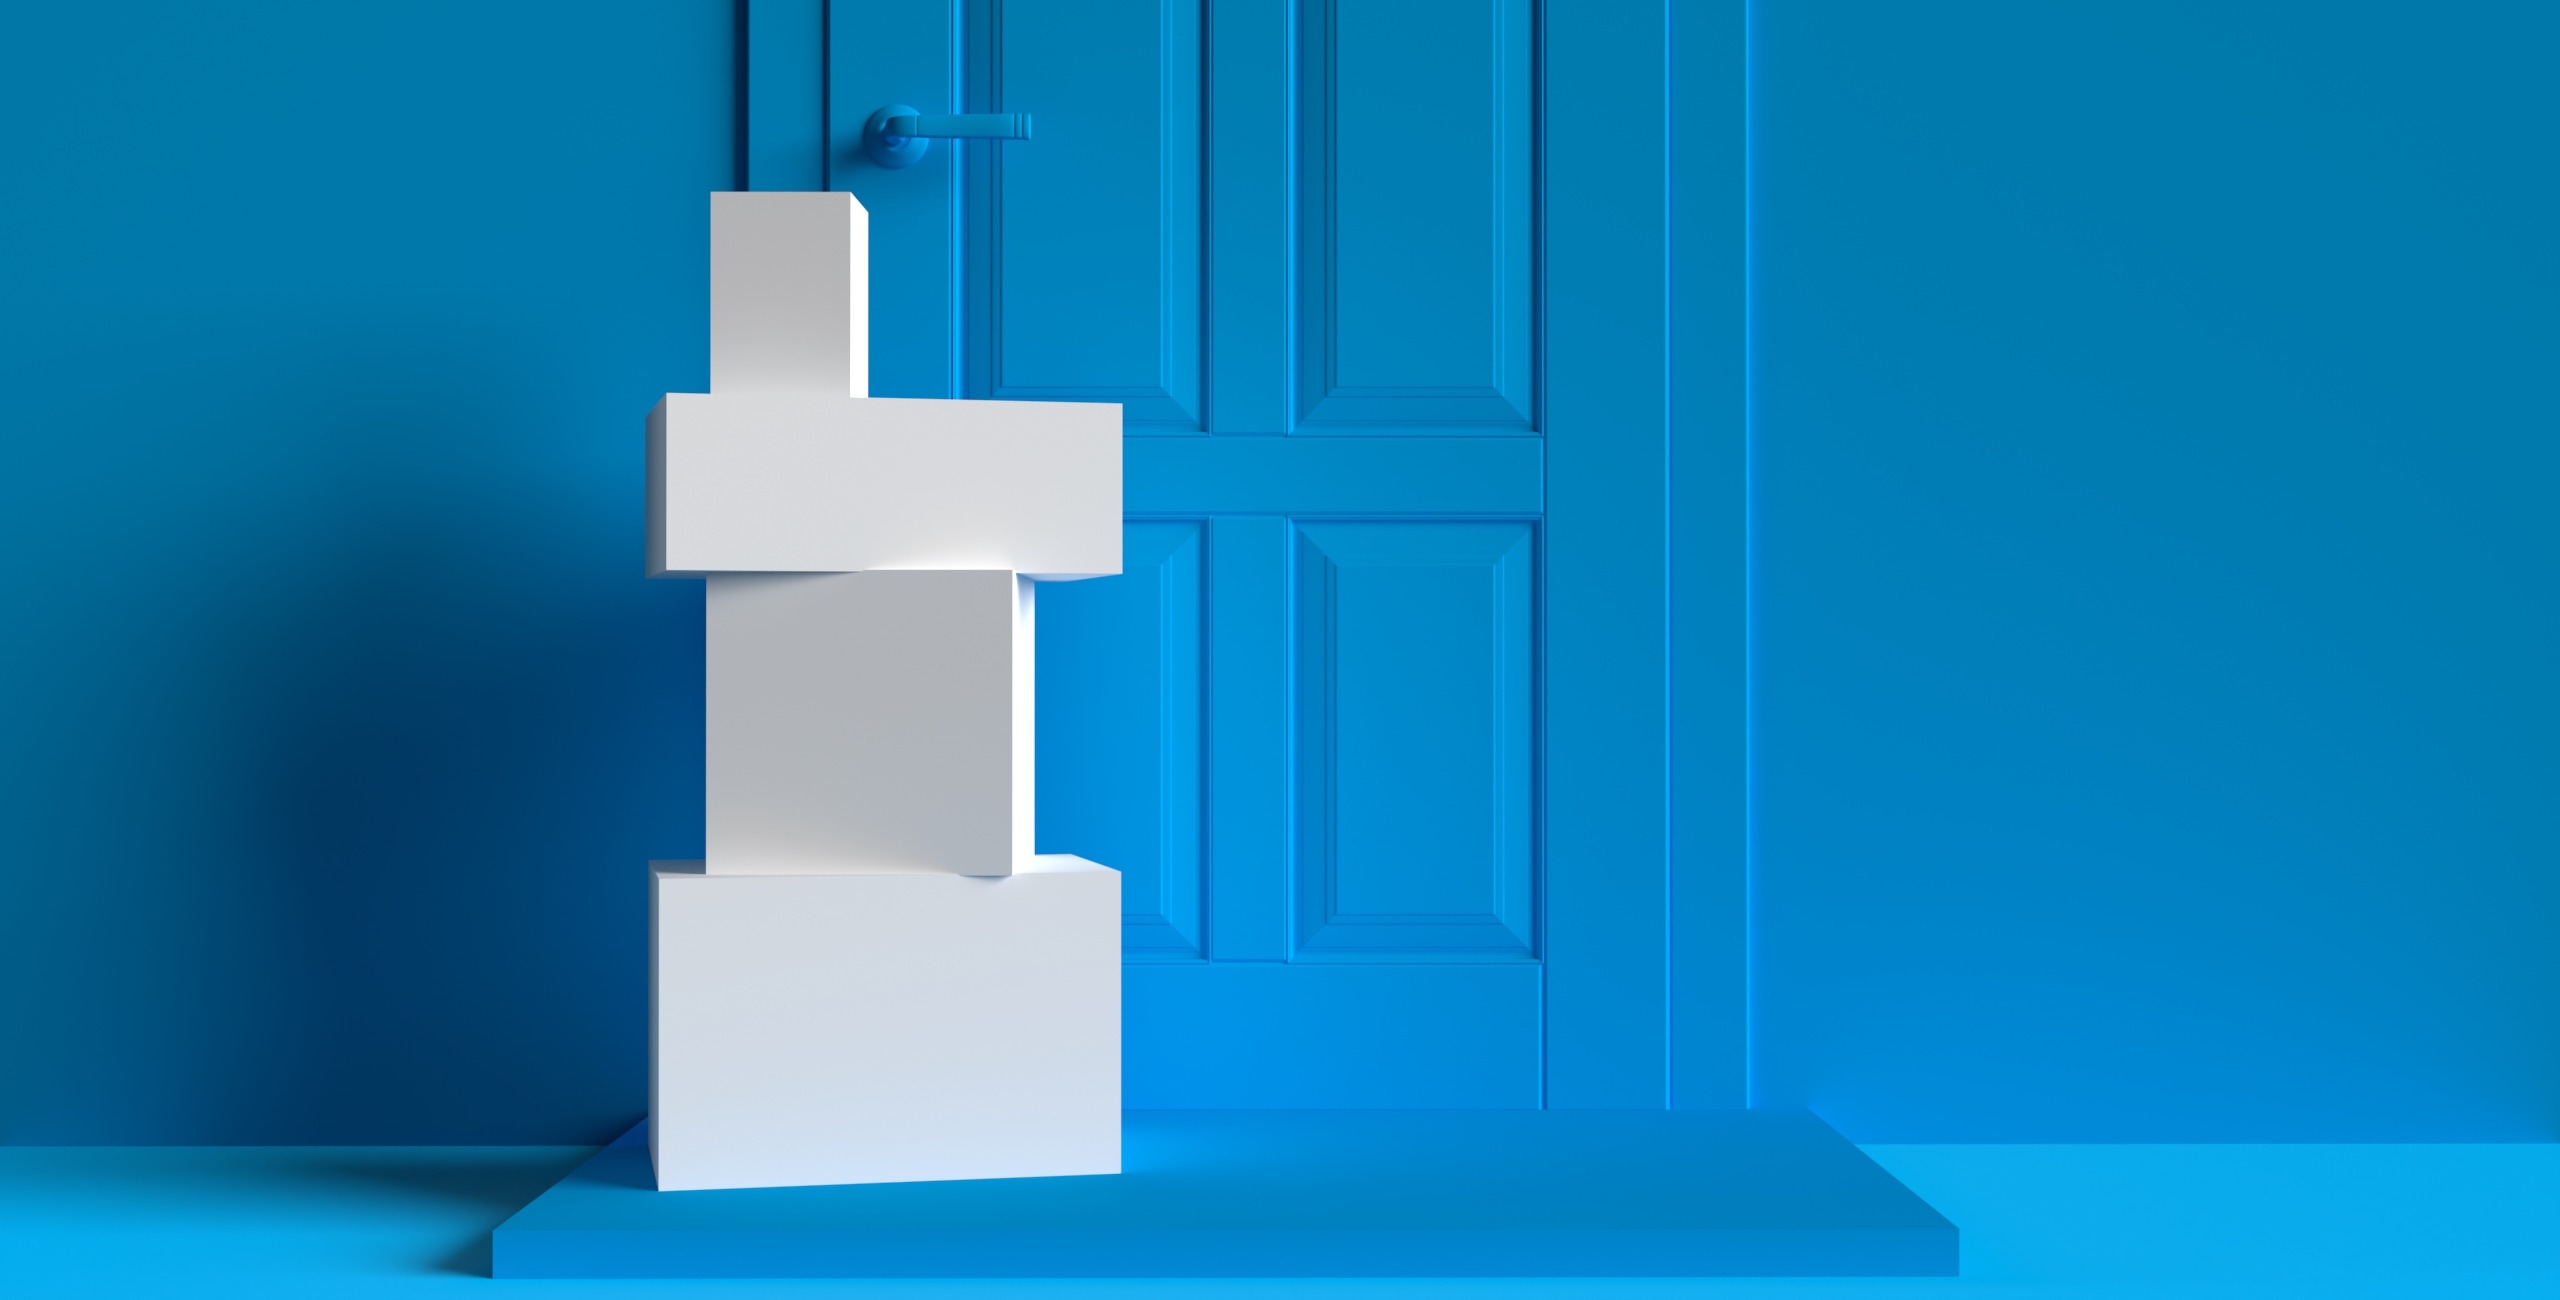 A stack of white boxes standing in front of a blue door.